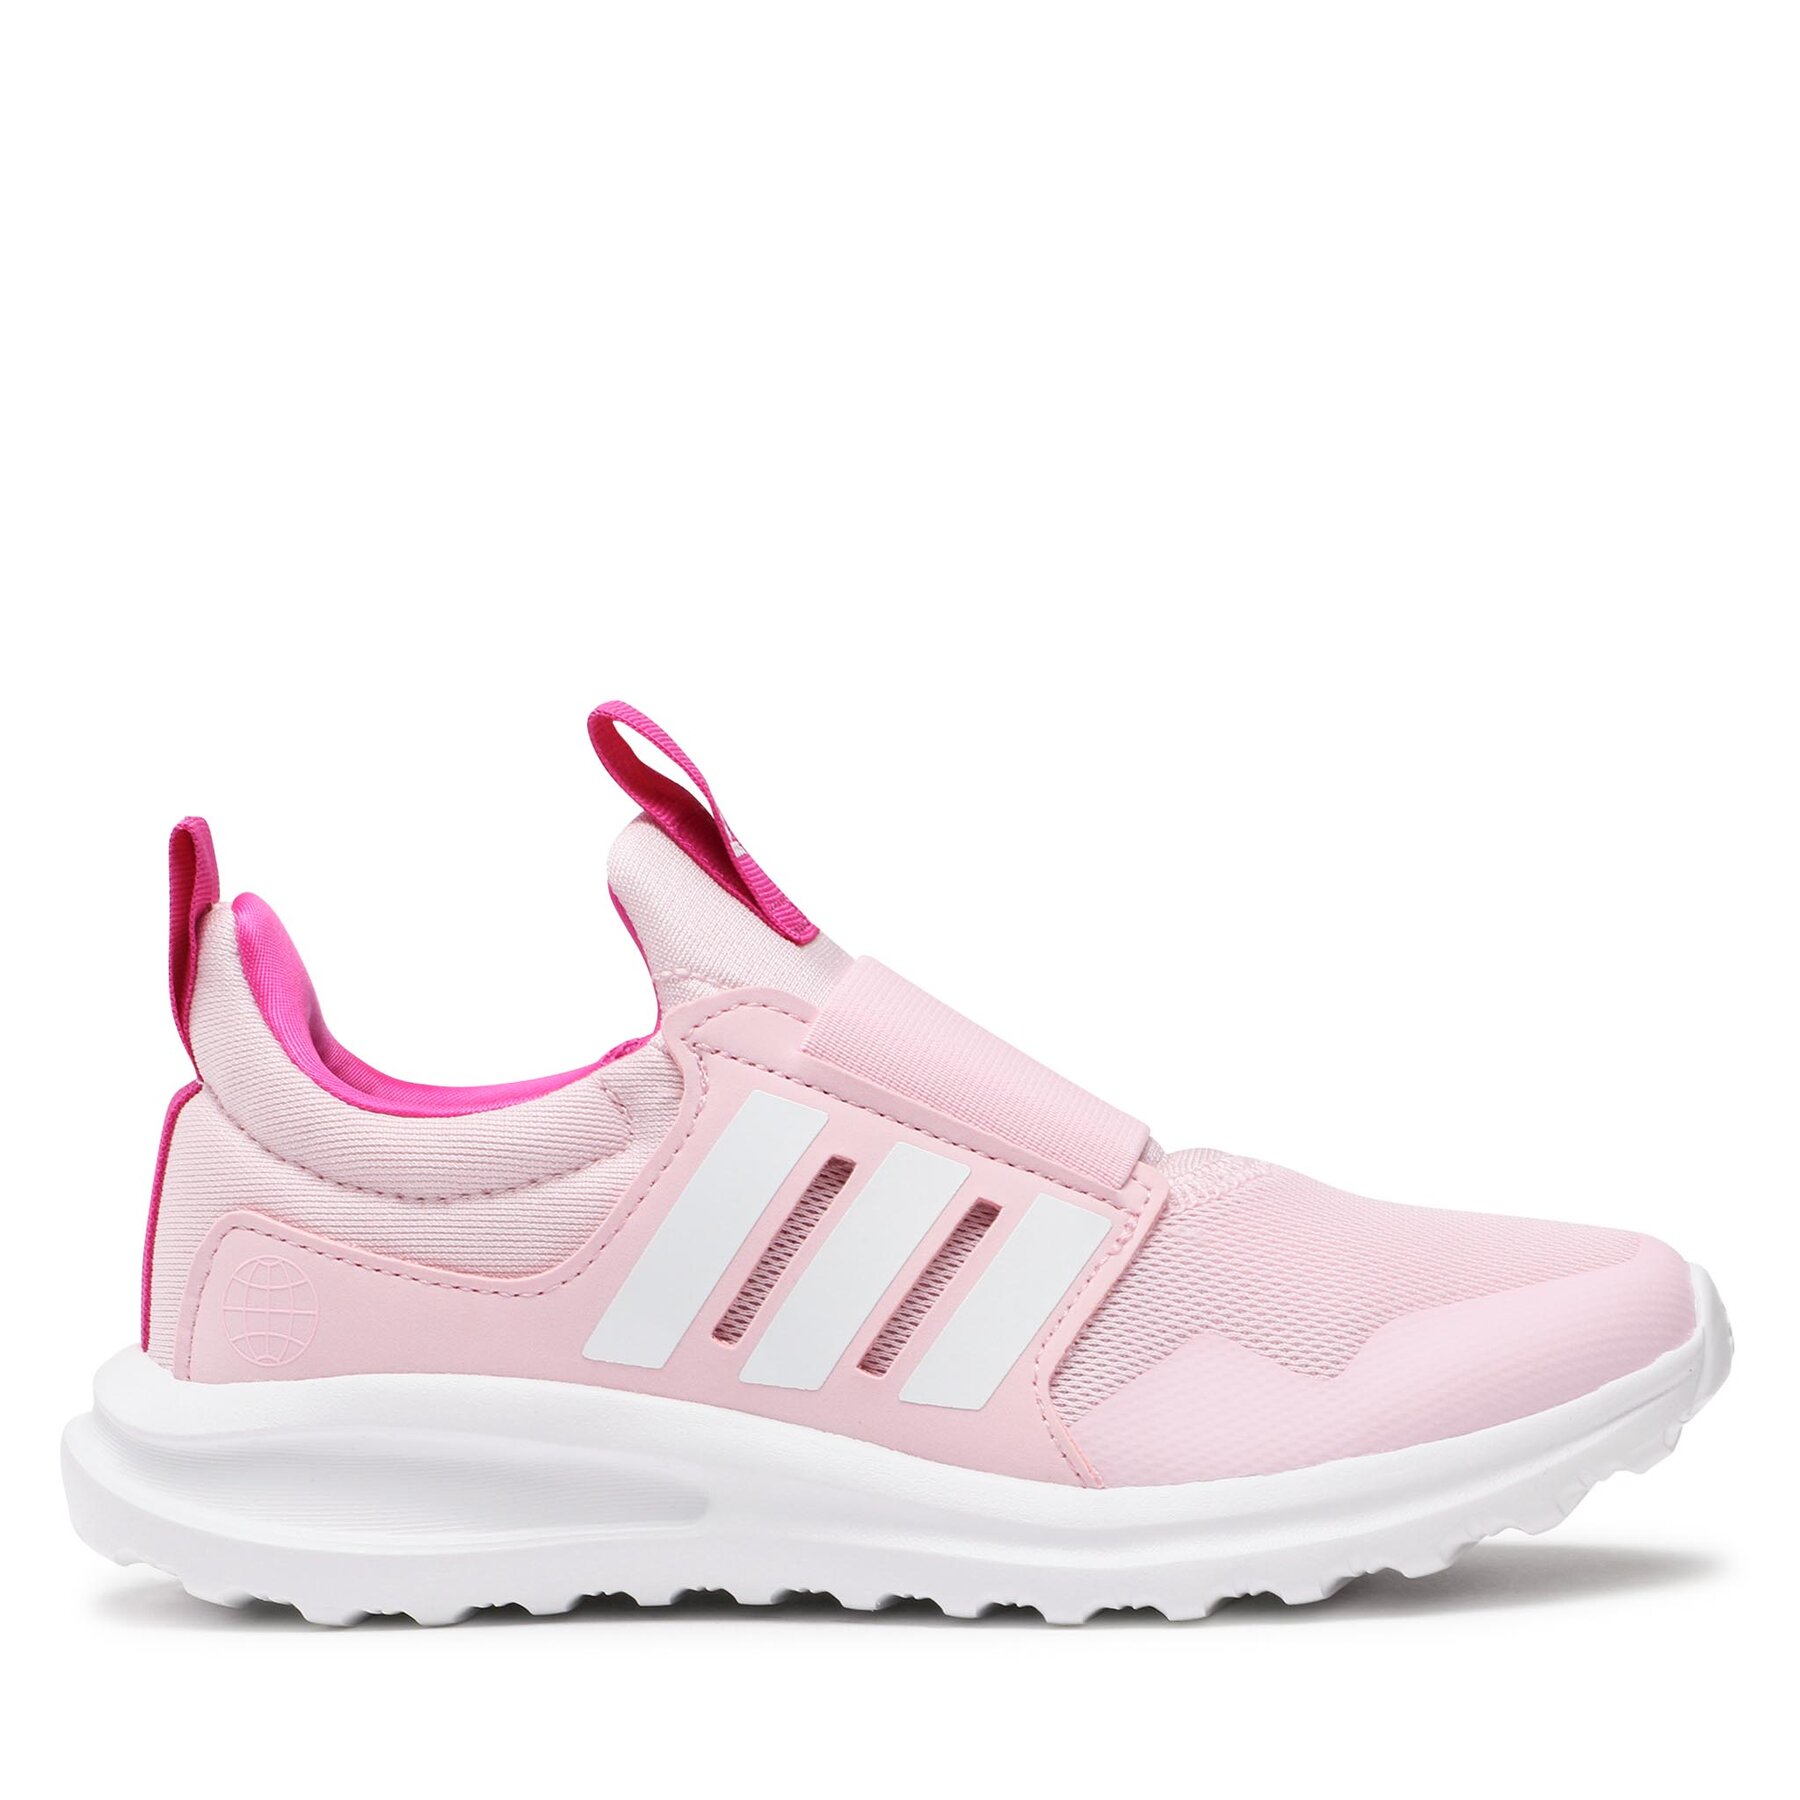 Sneakers adidas Activeride 2.0 Sport Running Slip-On Shoes HQ6227 Rose